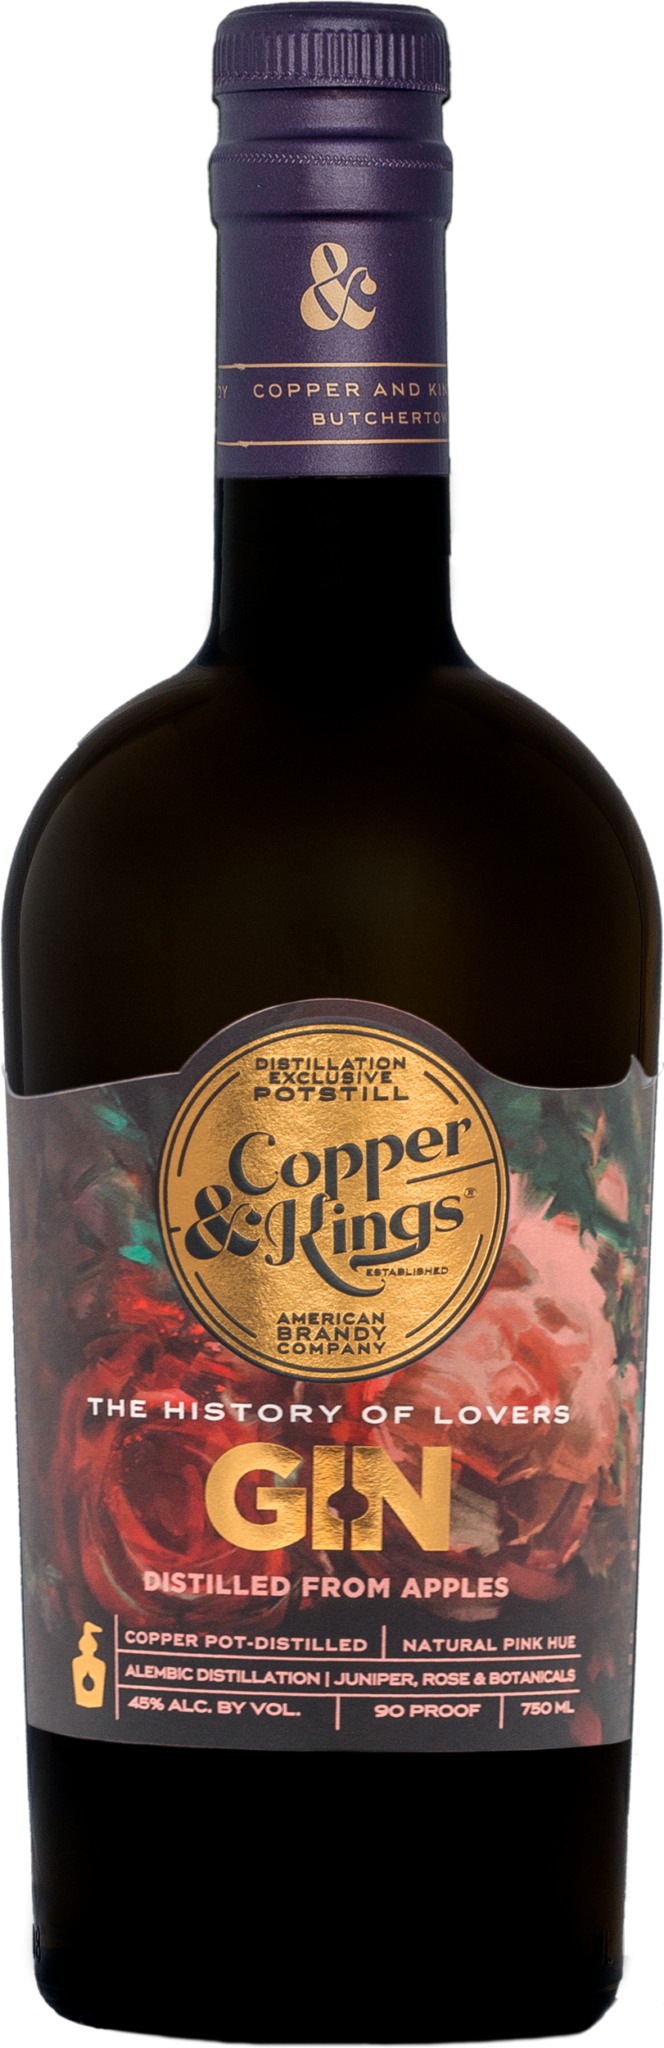 Copper & Kings History of Lovers Gin